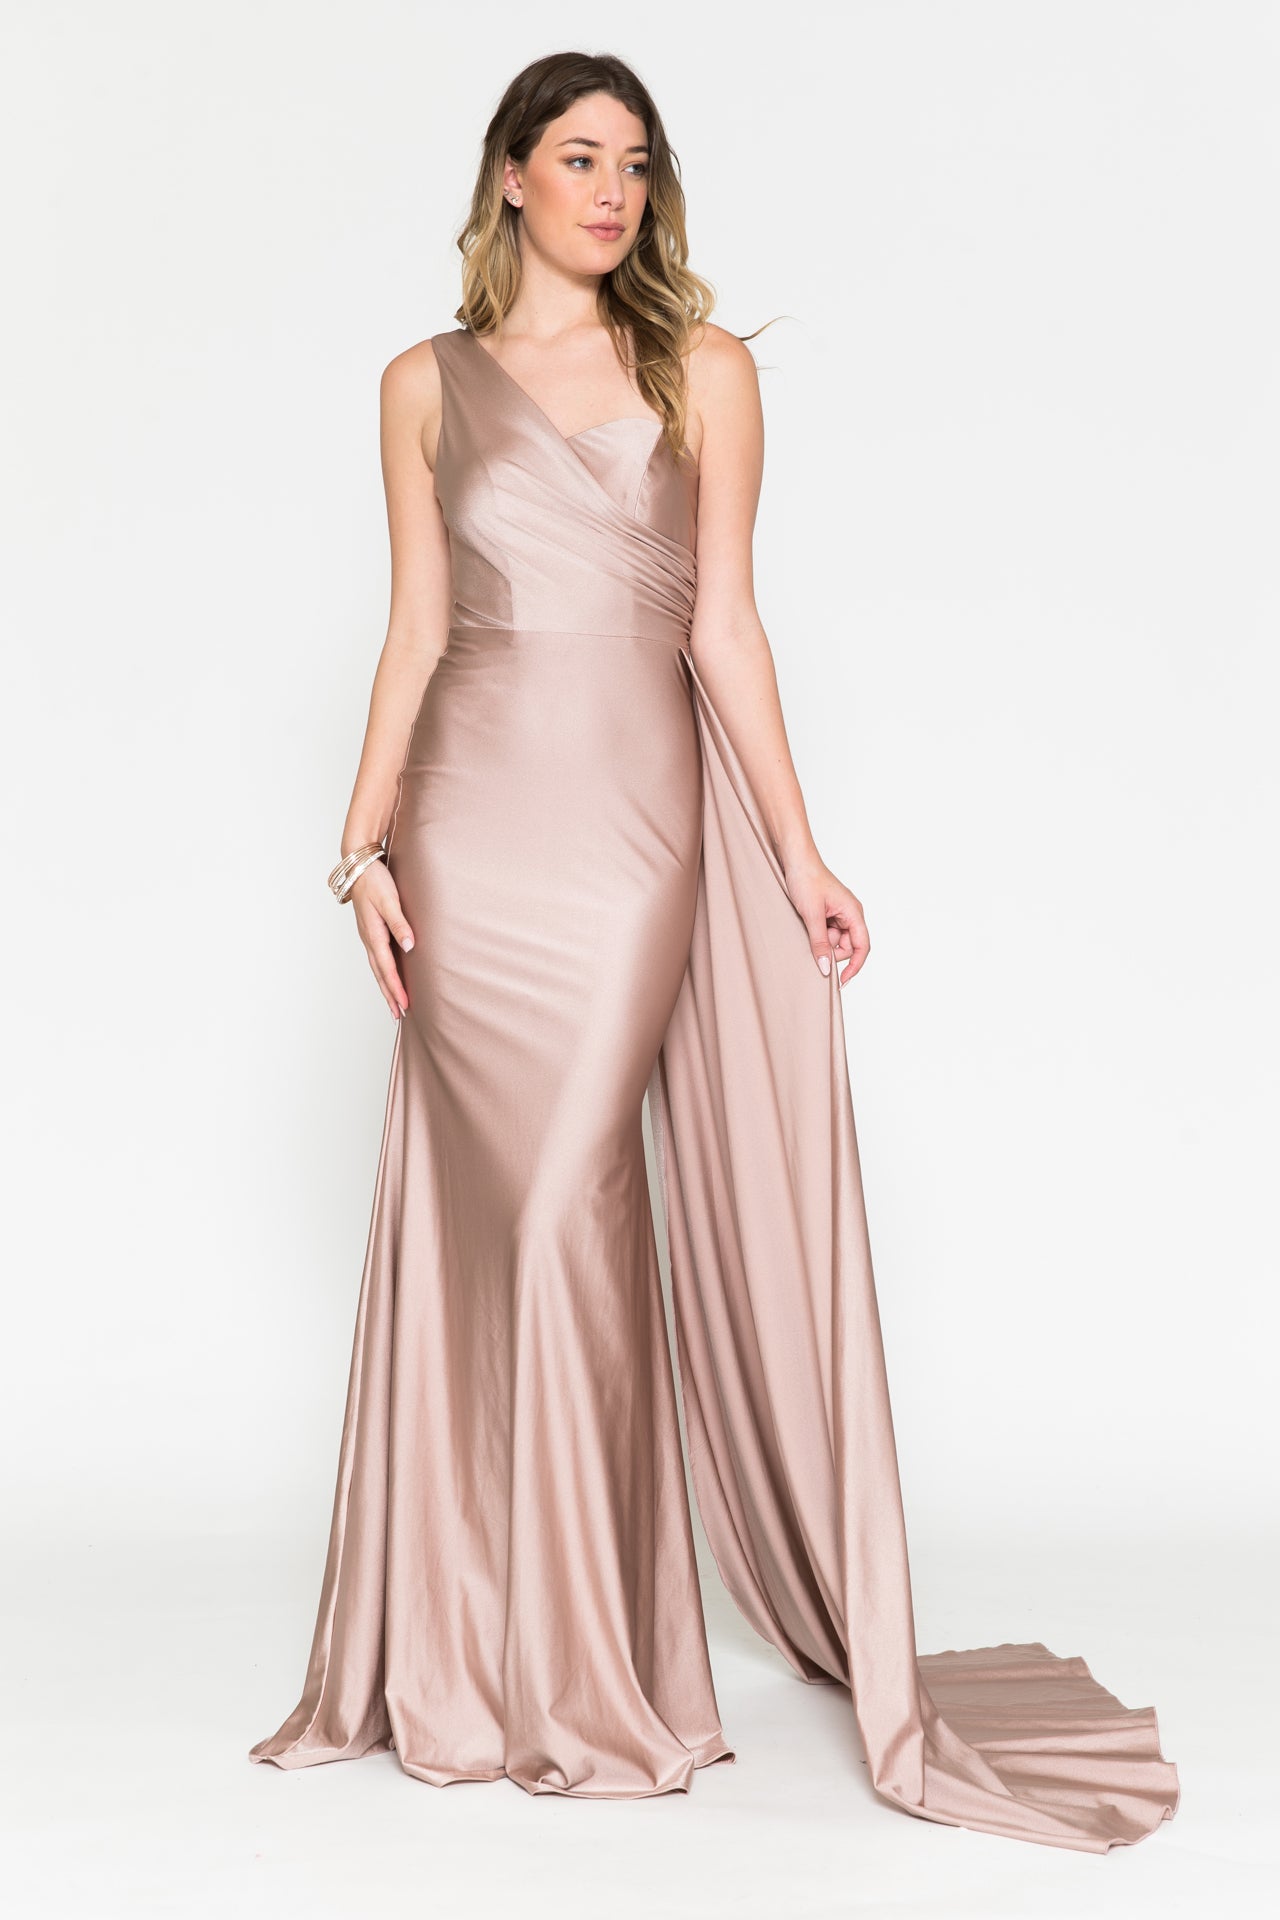 Asymmetric One-Shoulder Stretchy Dress w/side sash. This is a beautiful dress for engagement pictures, bridesmaid dress, or an evening event. 